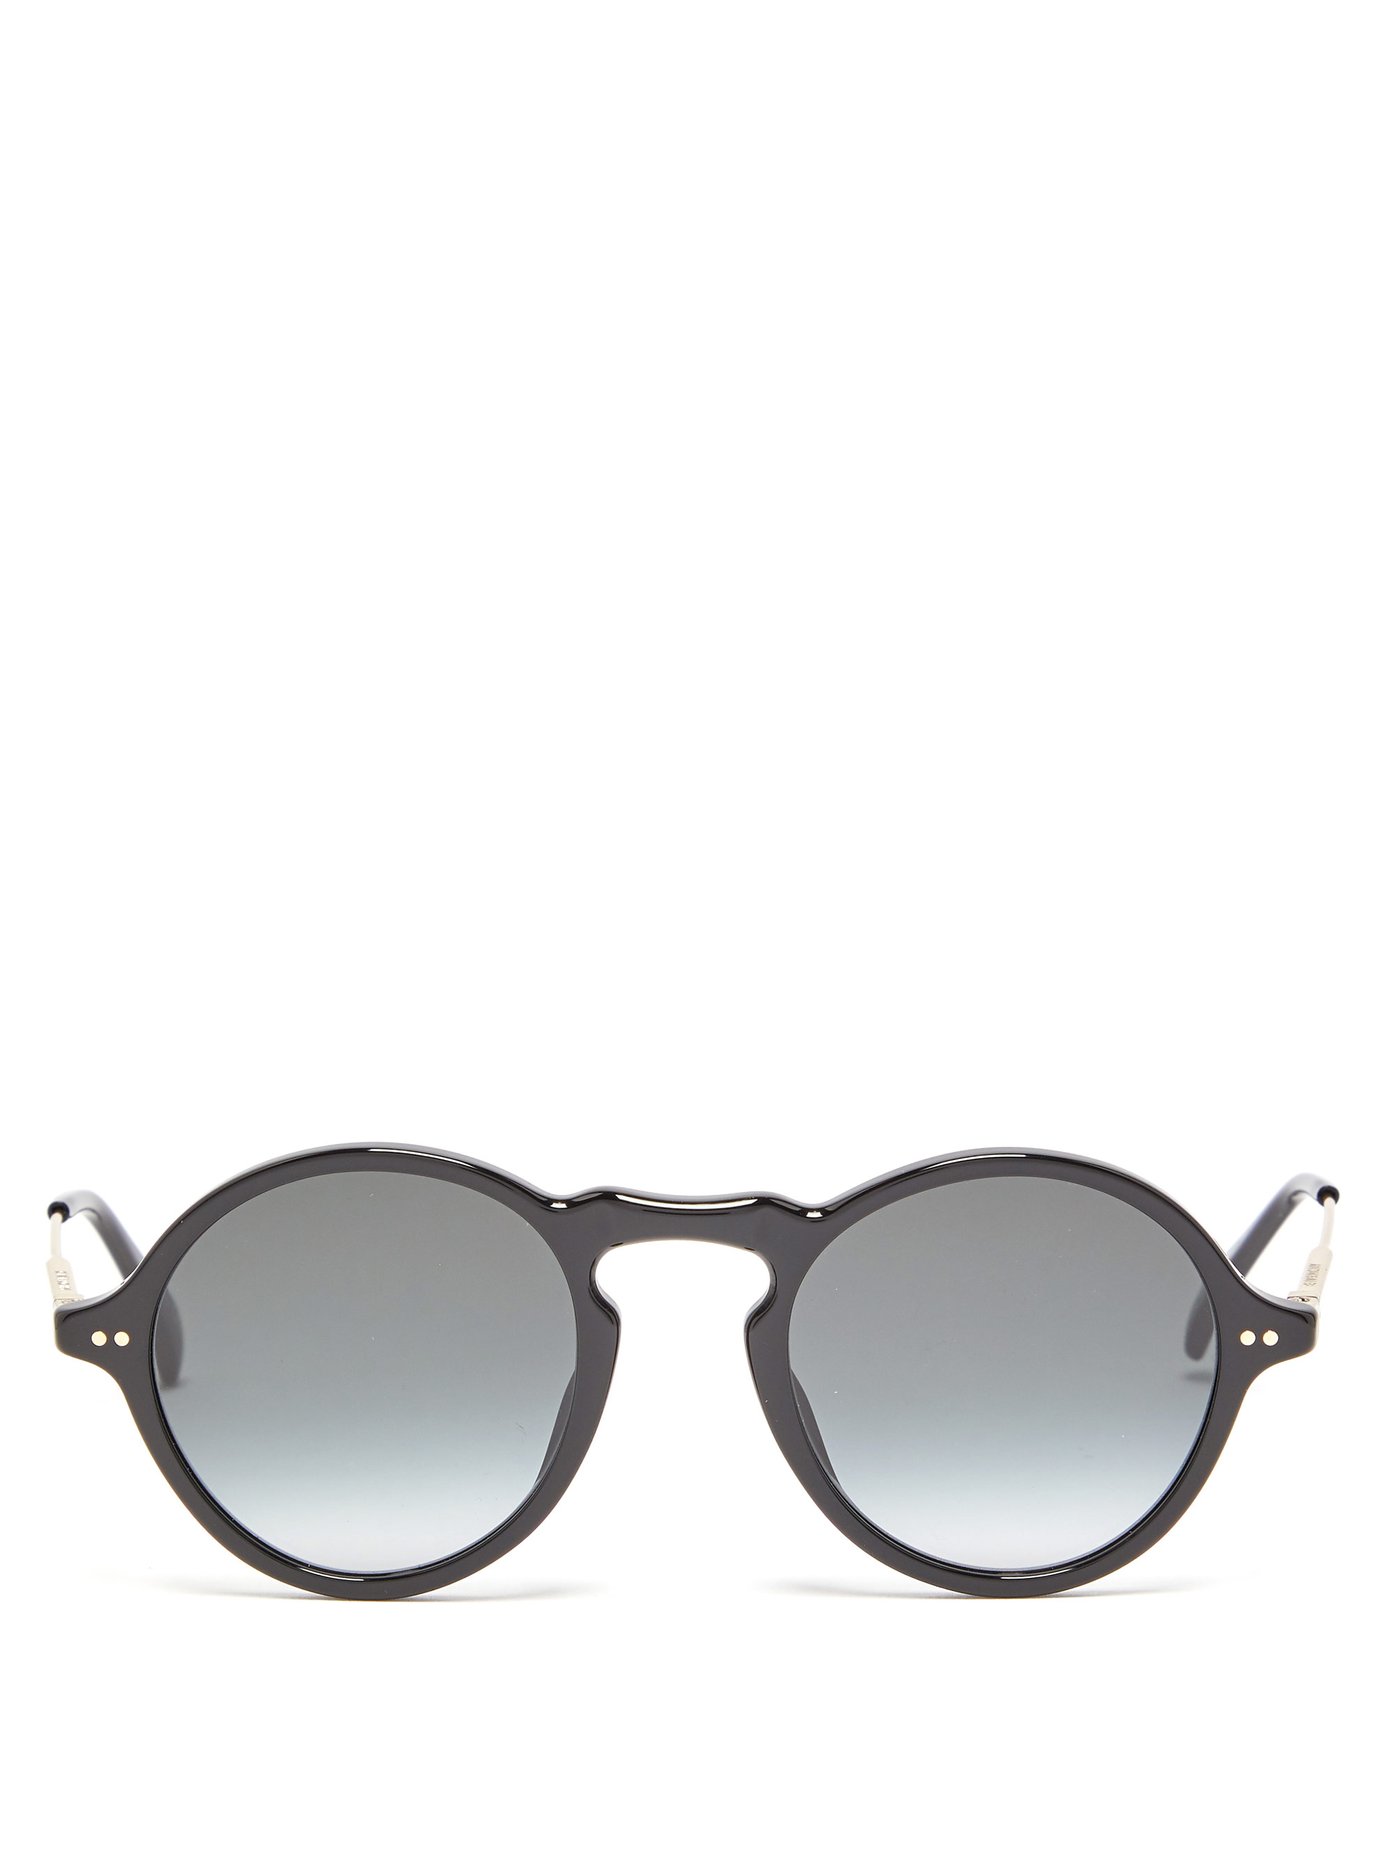 Round acetate sunglasses | Givenchy 